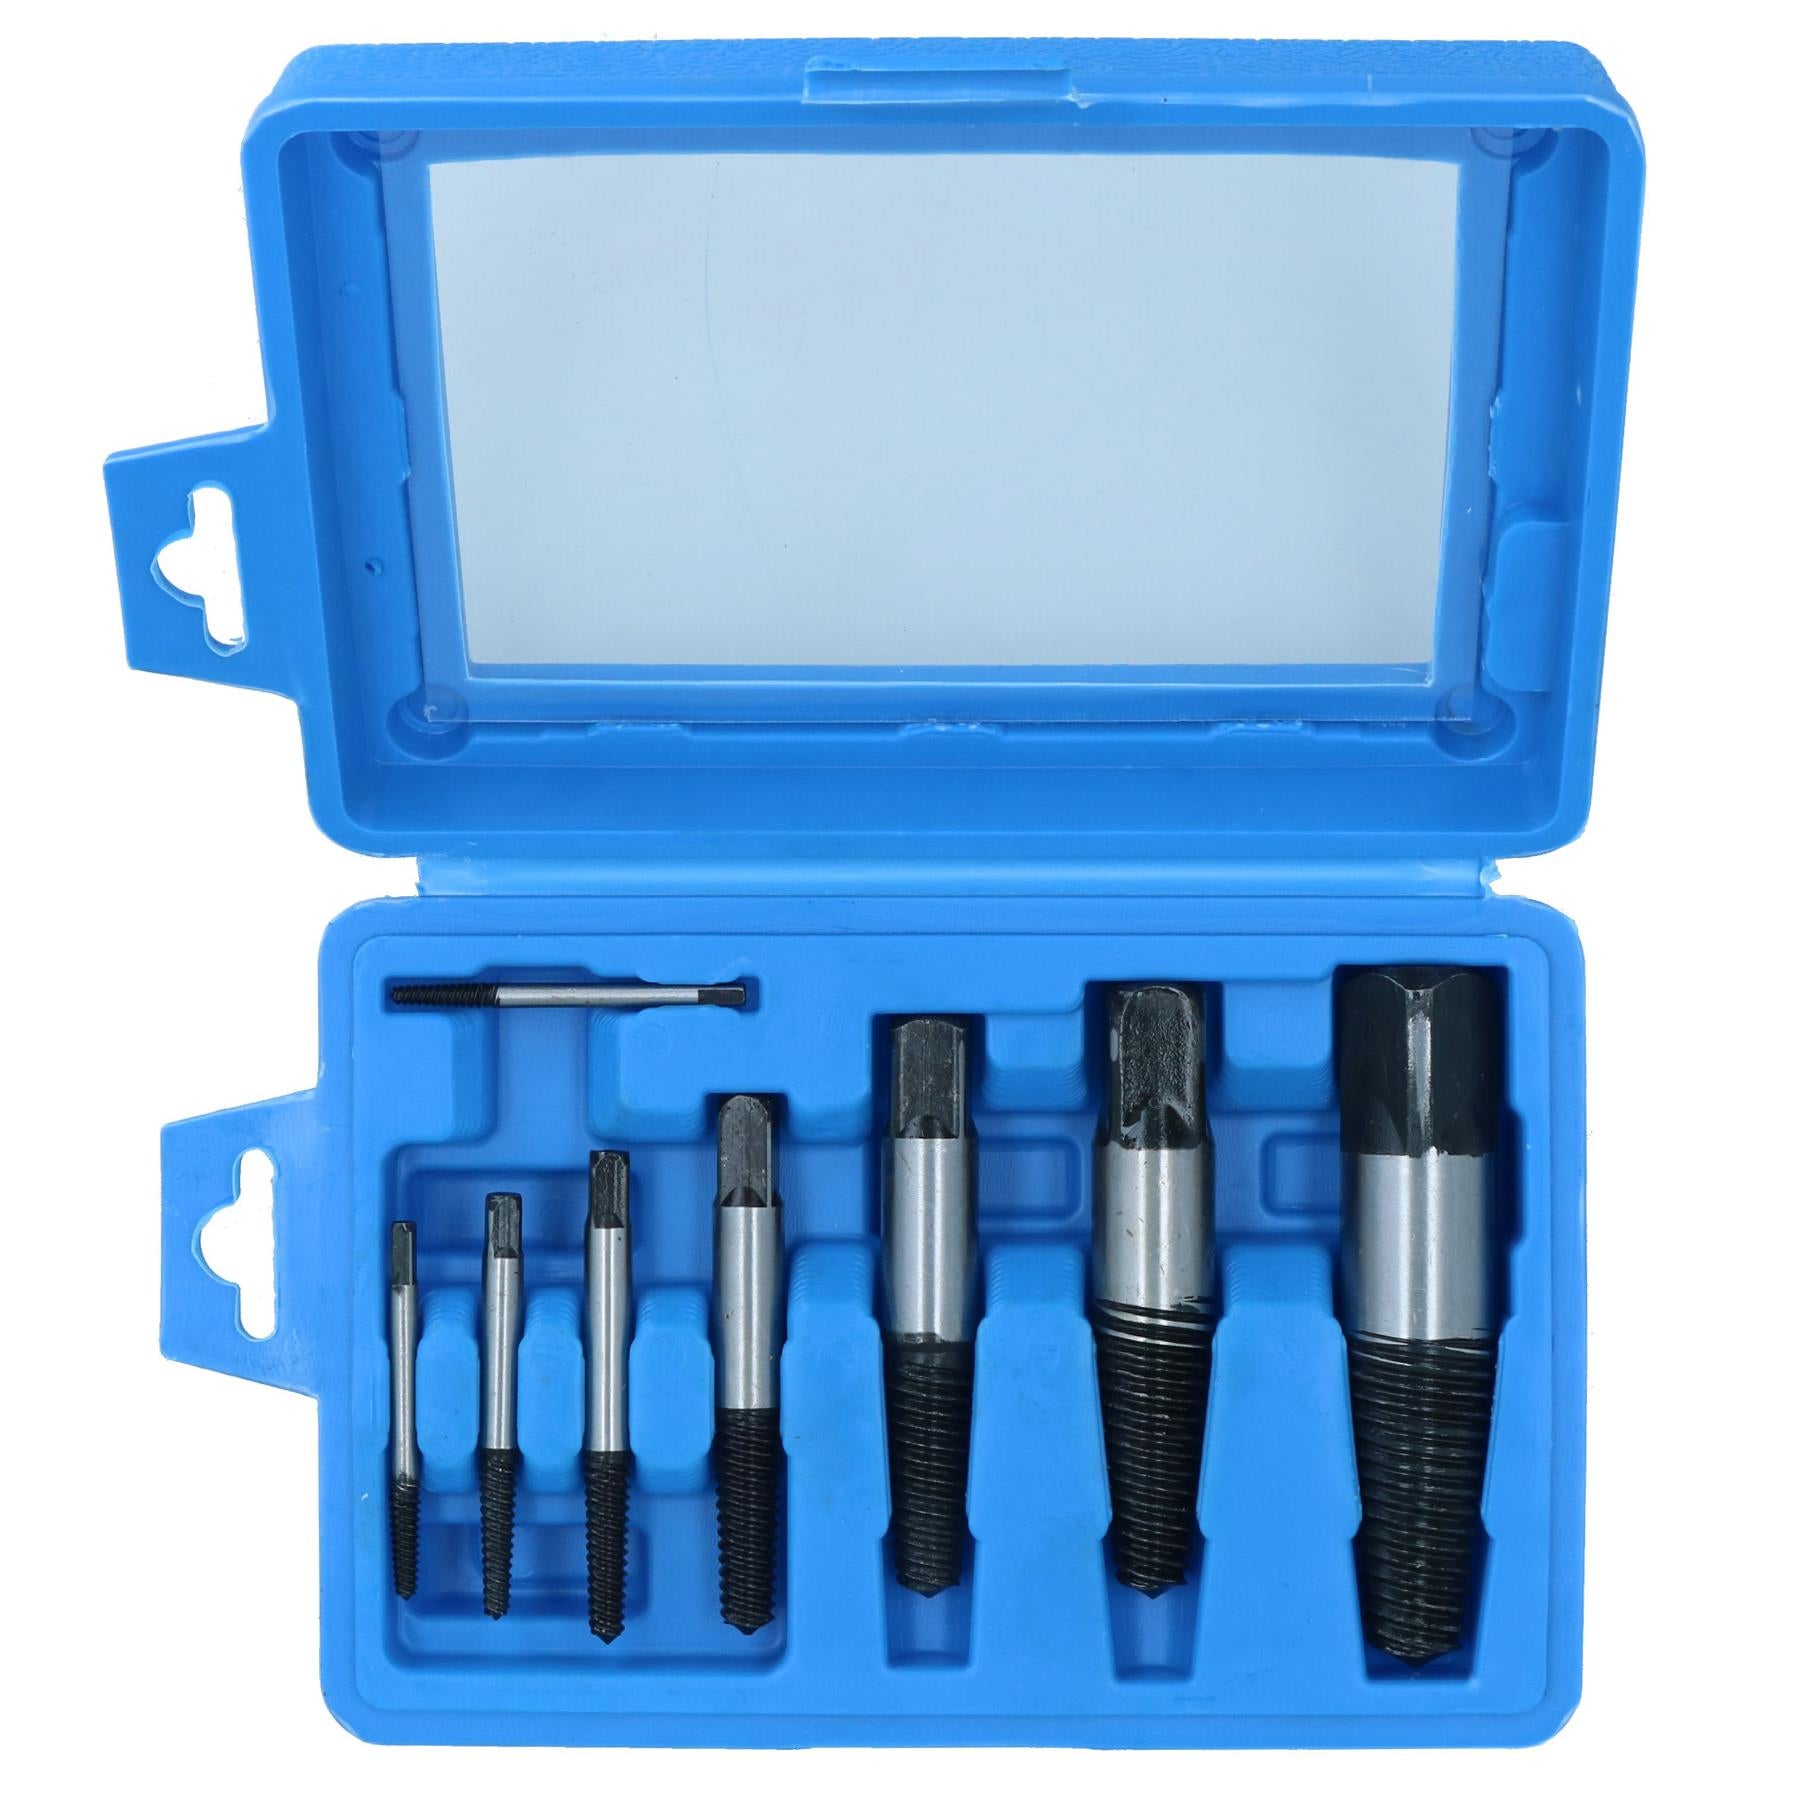 Stud / Bolt / Screw Extractor Remover Set for Rusted, Rounded, Seized Bolt TE111